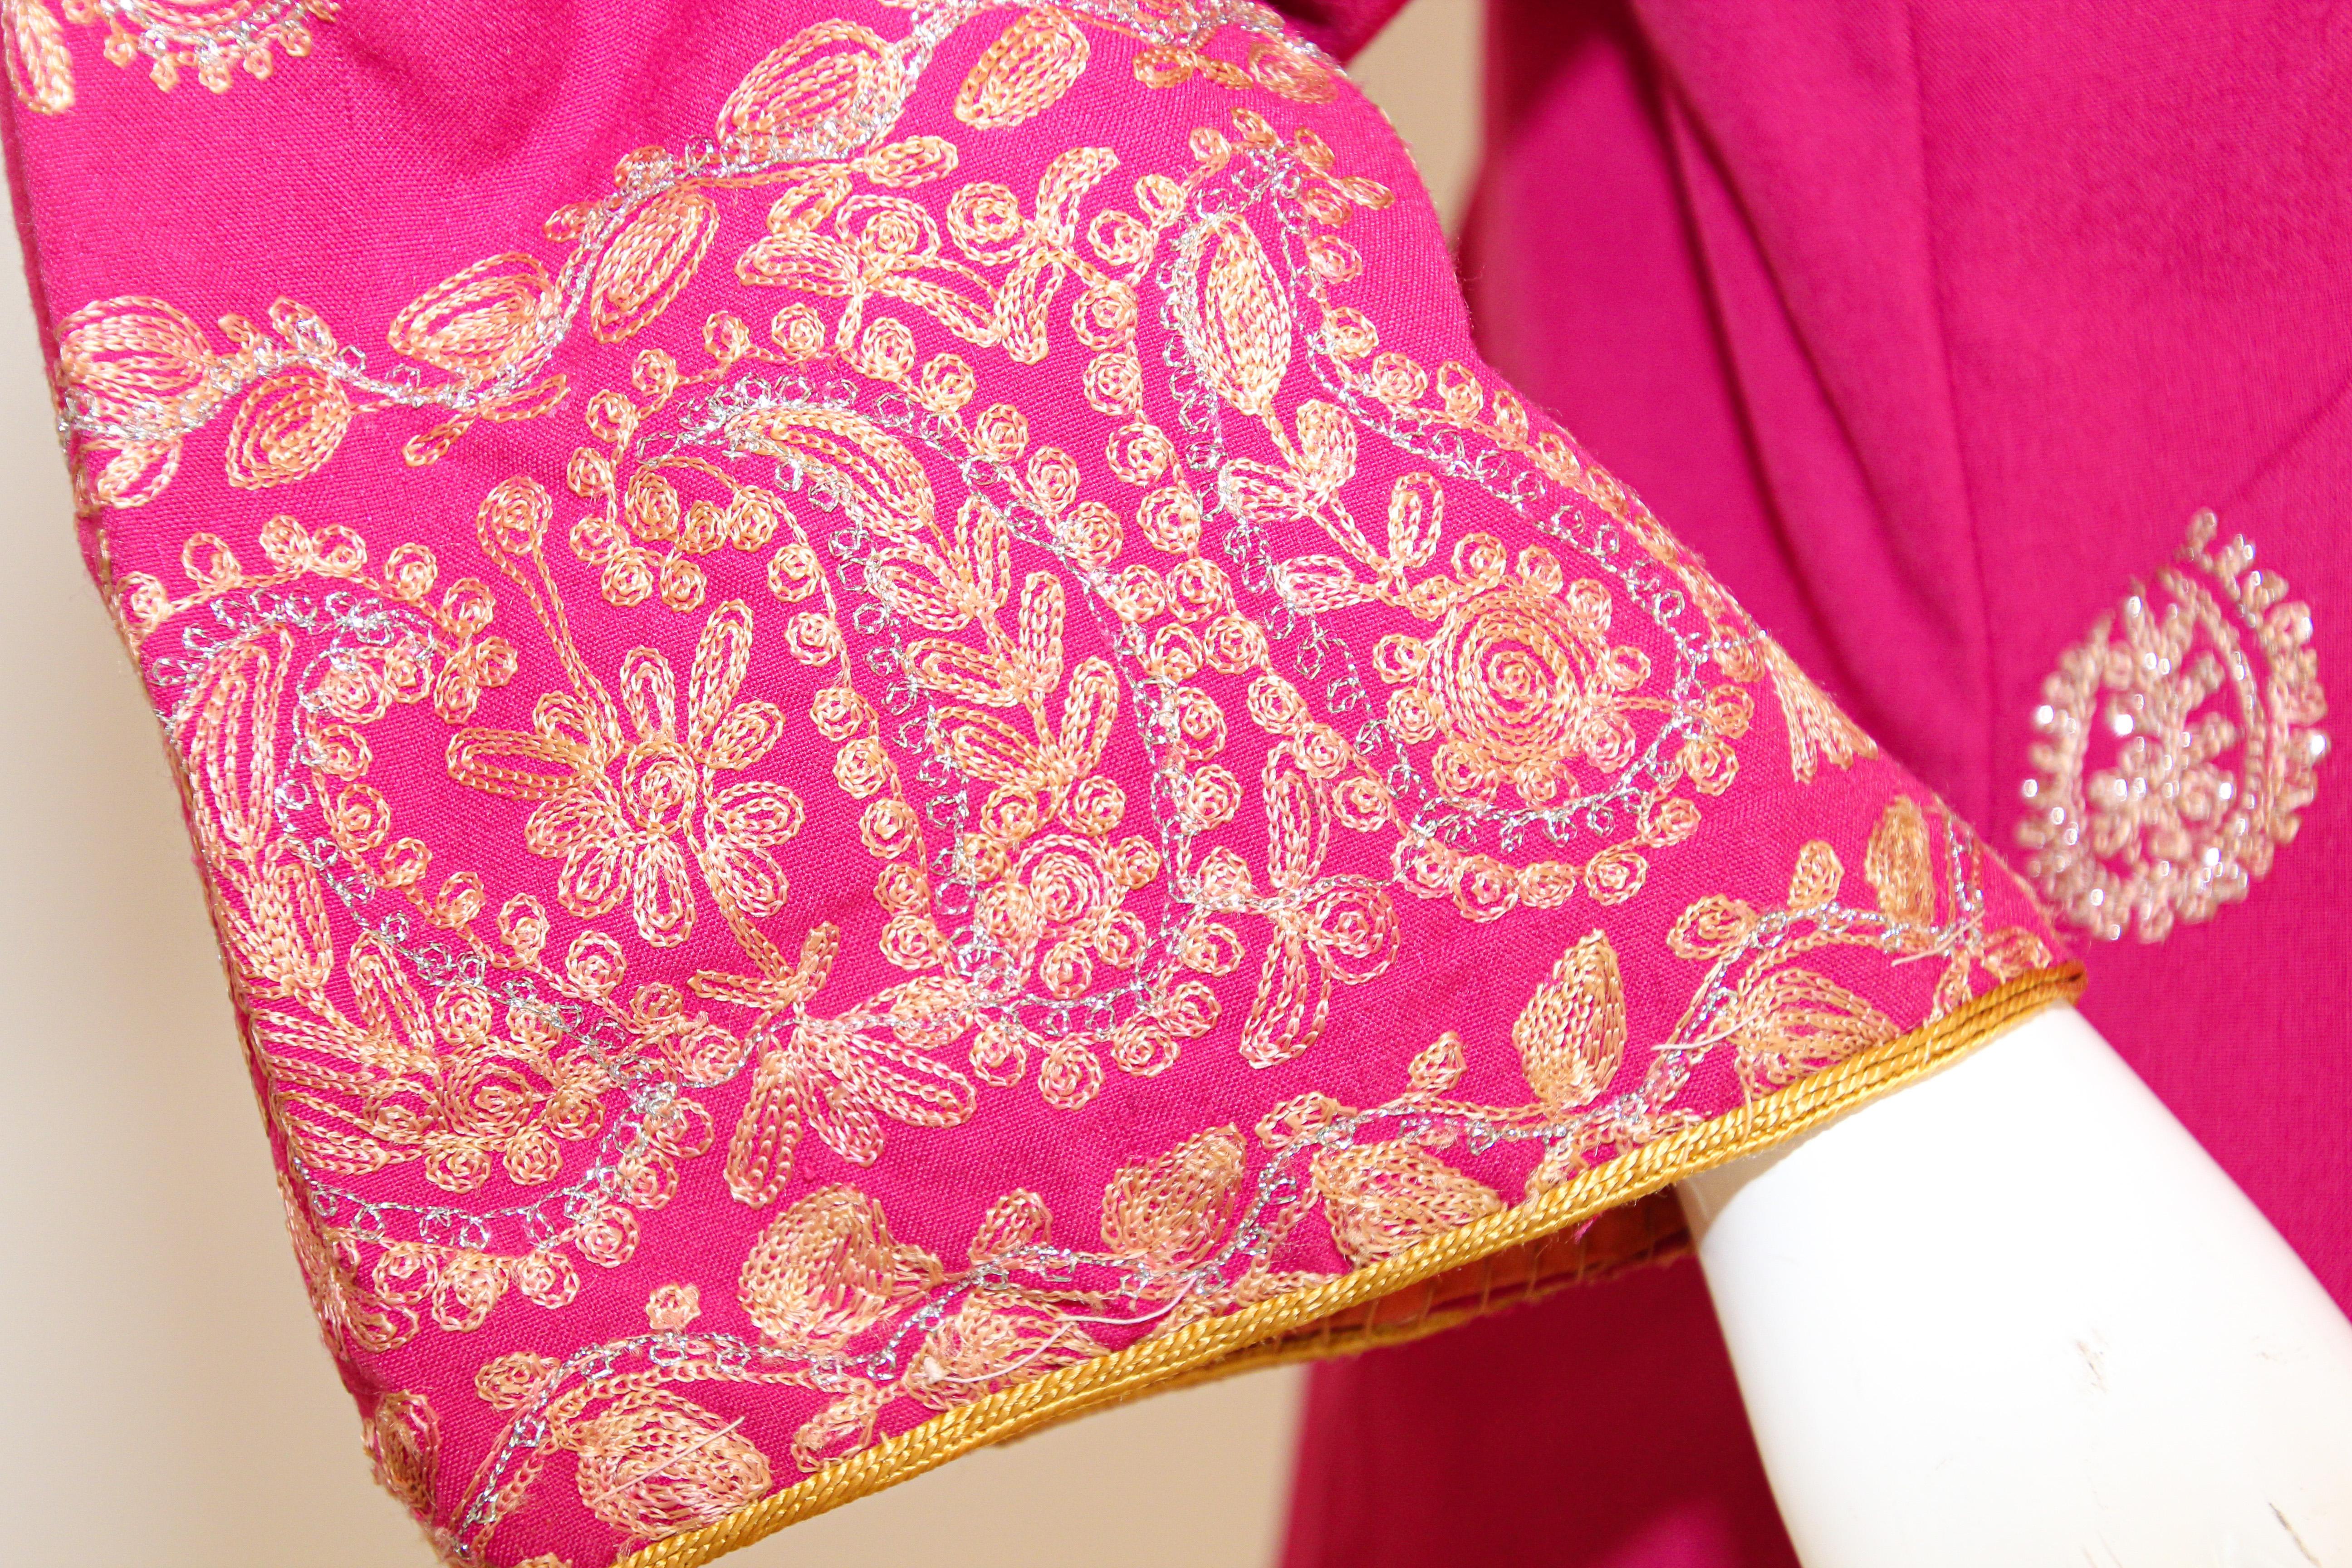 Women's Vintage Moroccan Caftan Hot Pink with Gold, 1970's For Sale